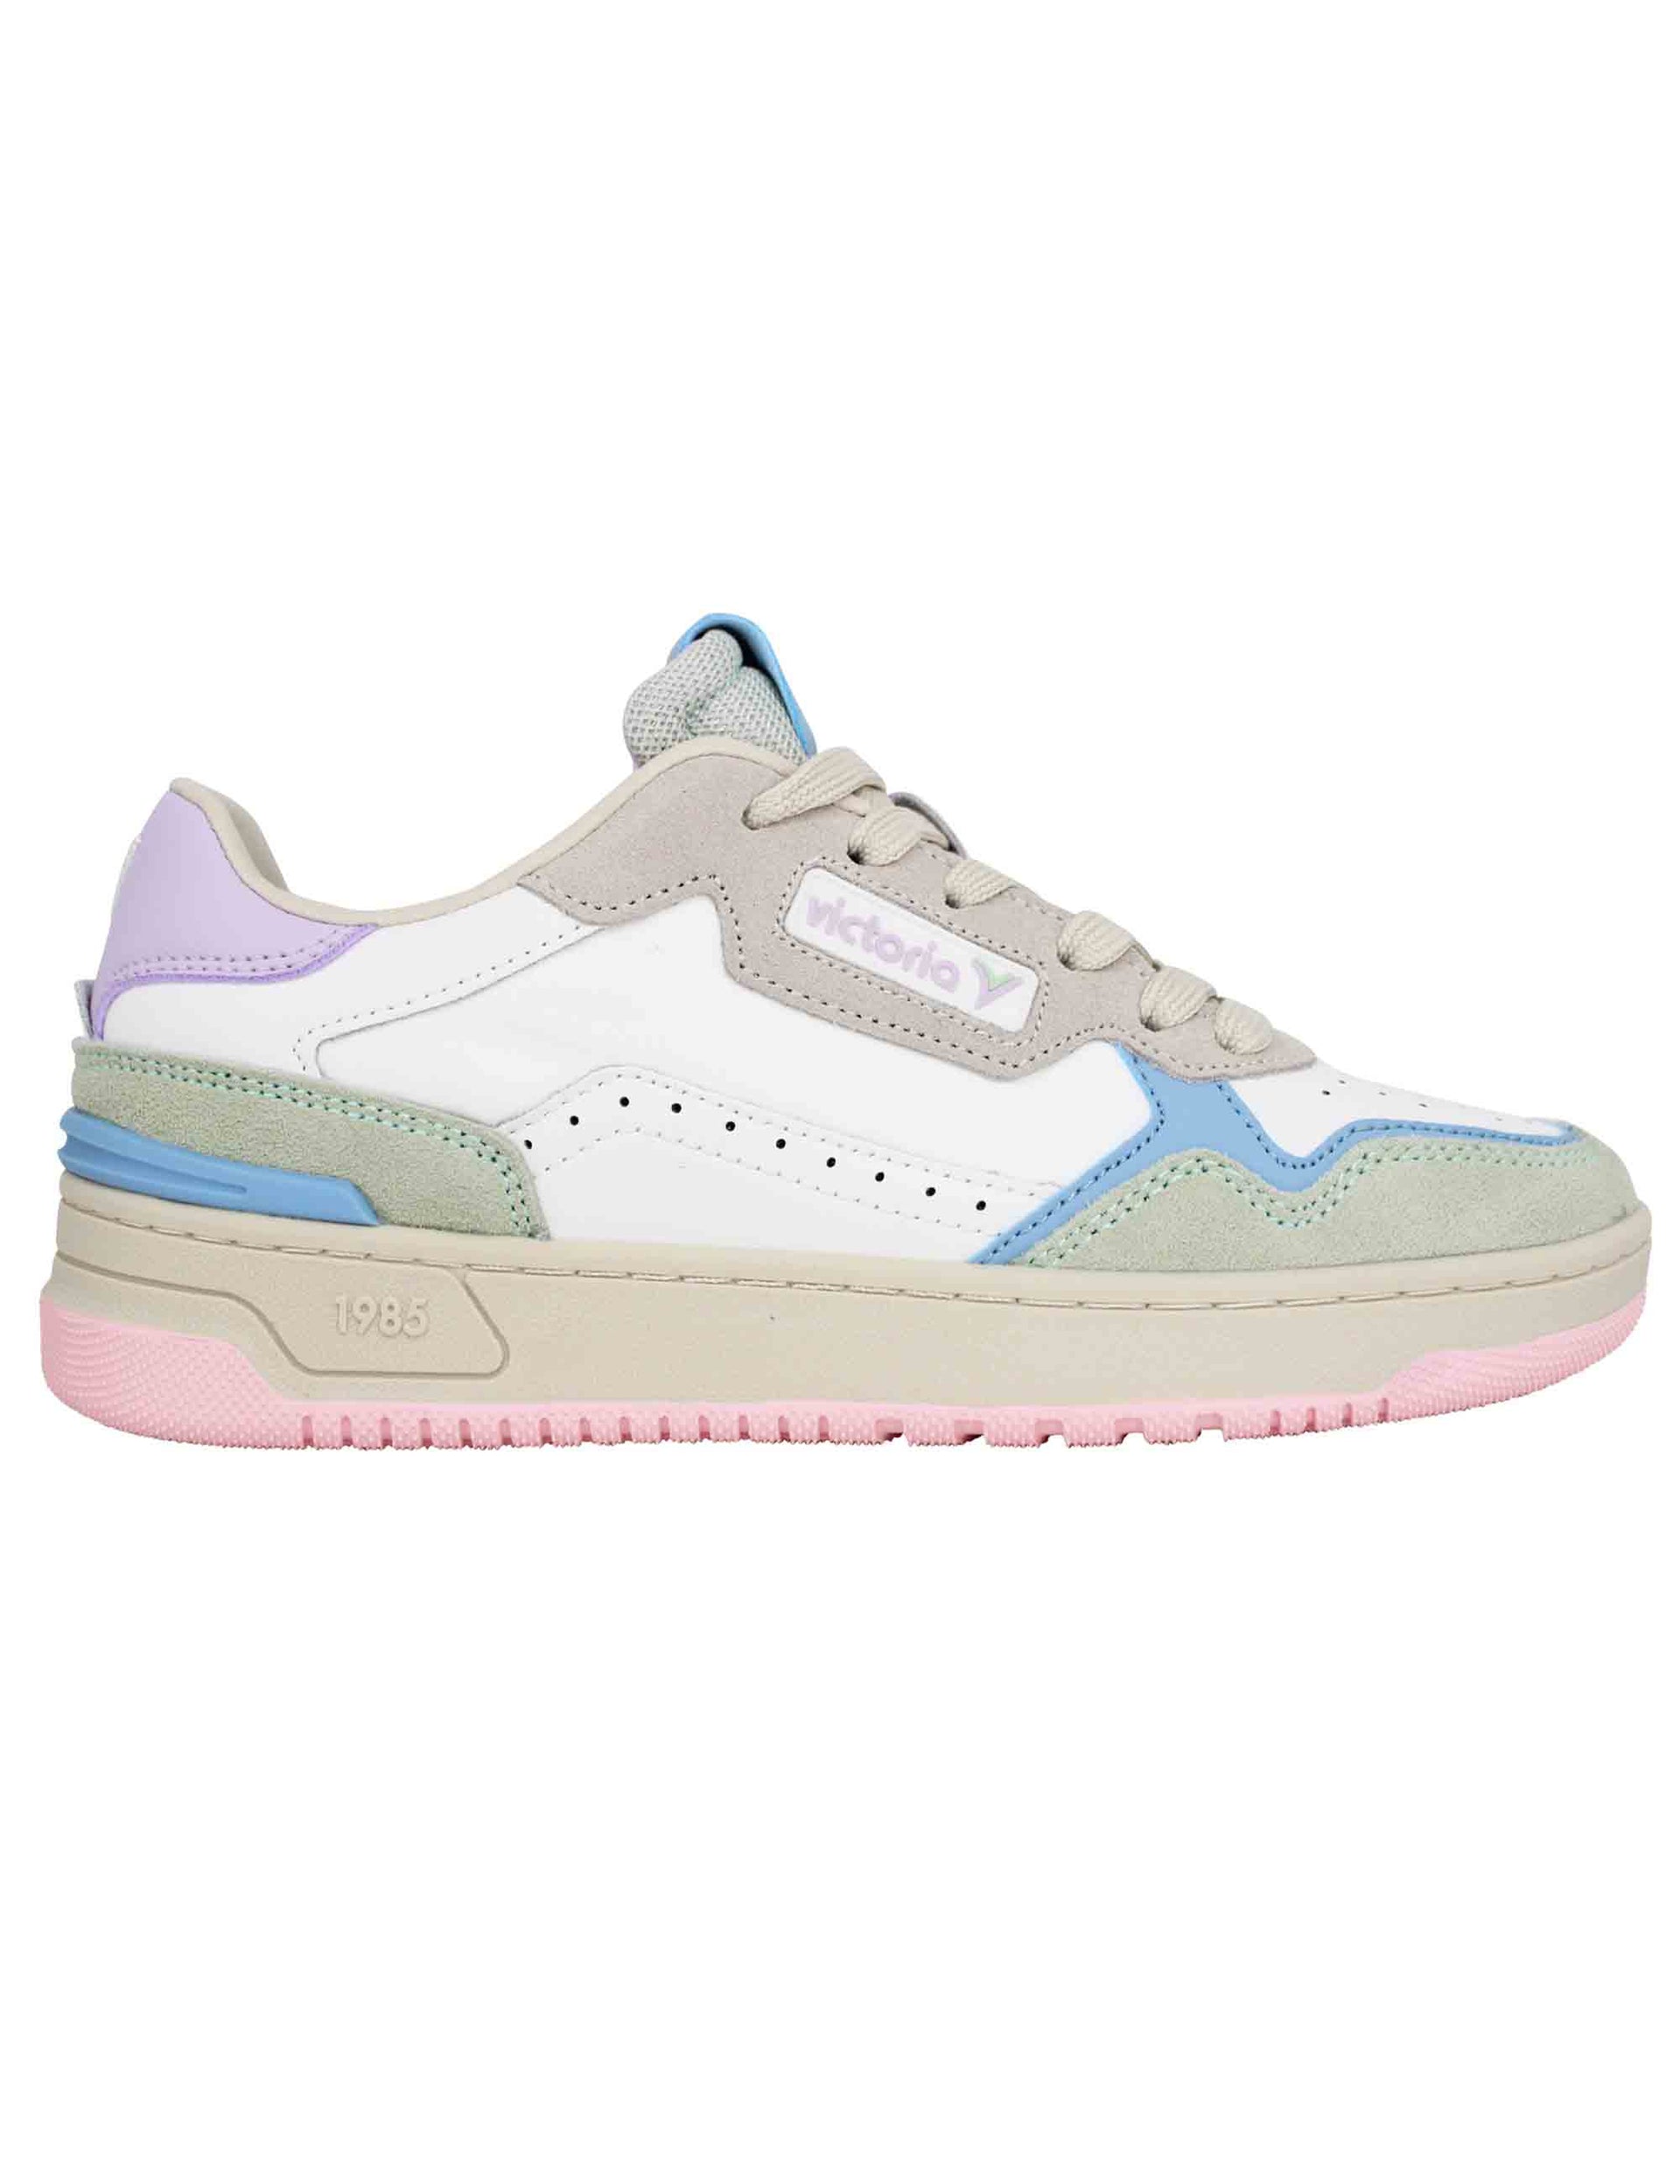 Men's sneakers in white leather with lilac leather inserts